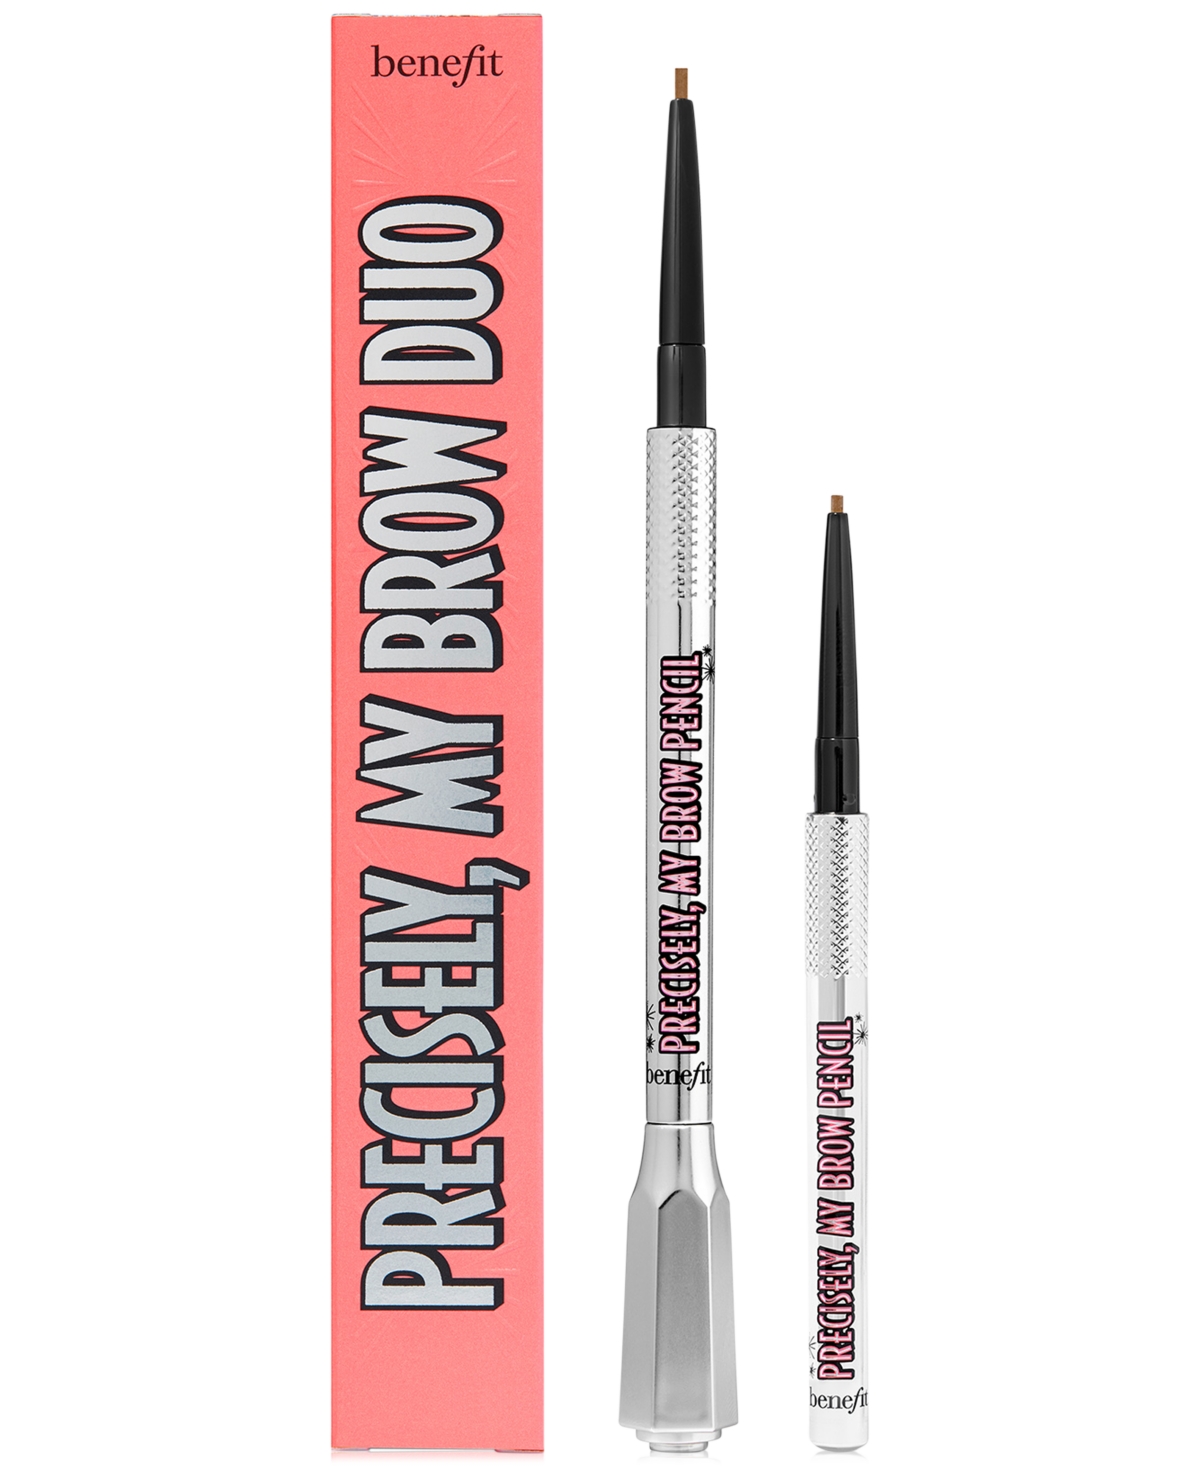 Benefit Cosmetics 2-pc. Precisely, My Brow Defining Eyebrow Pencil Set In Neutral Blonde